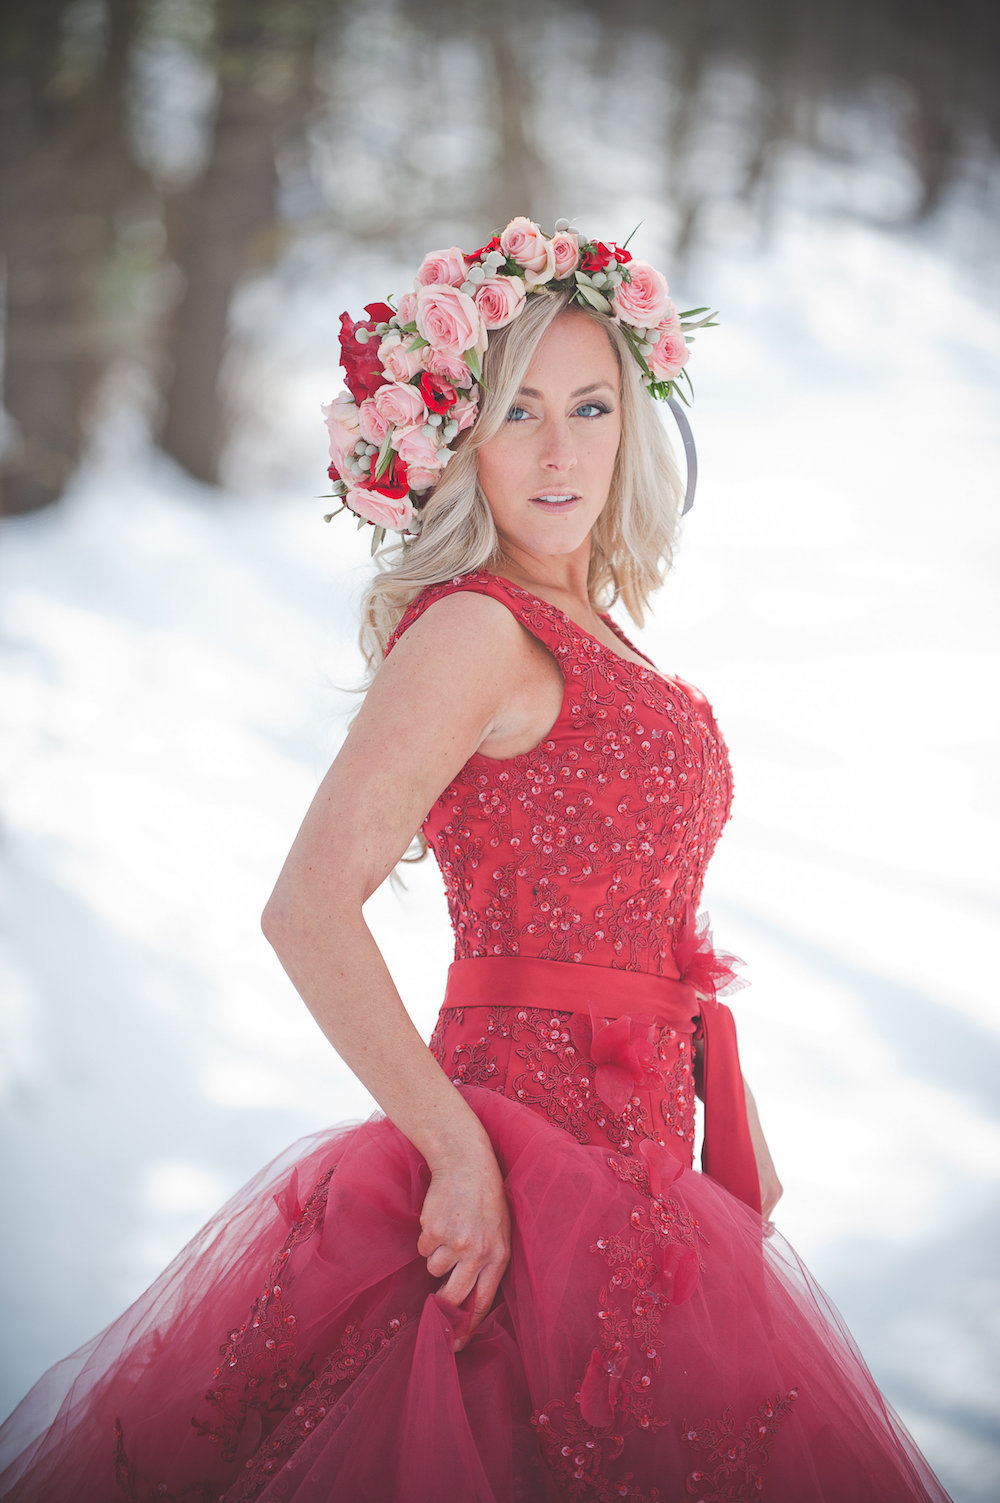  Pomegranate Red Winter Wedding Inspiration - photo by Jenni Grace Photography / floral crown by The Blue Daisy 